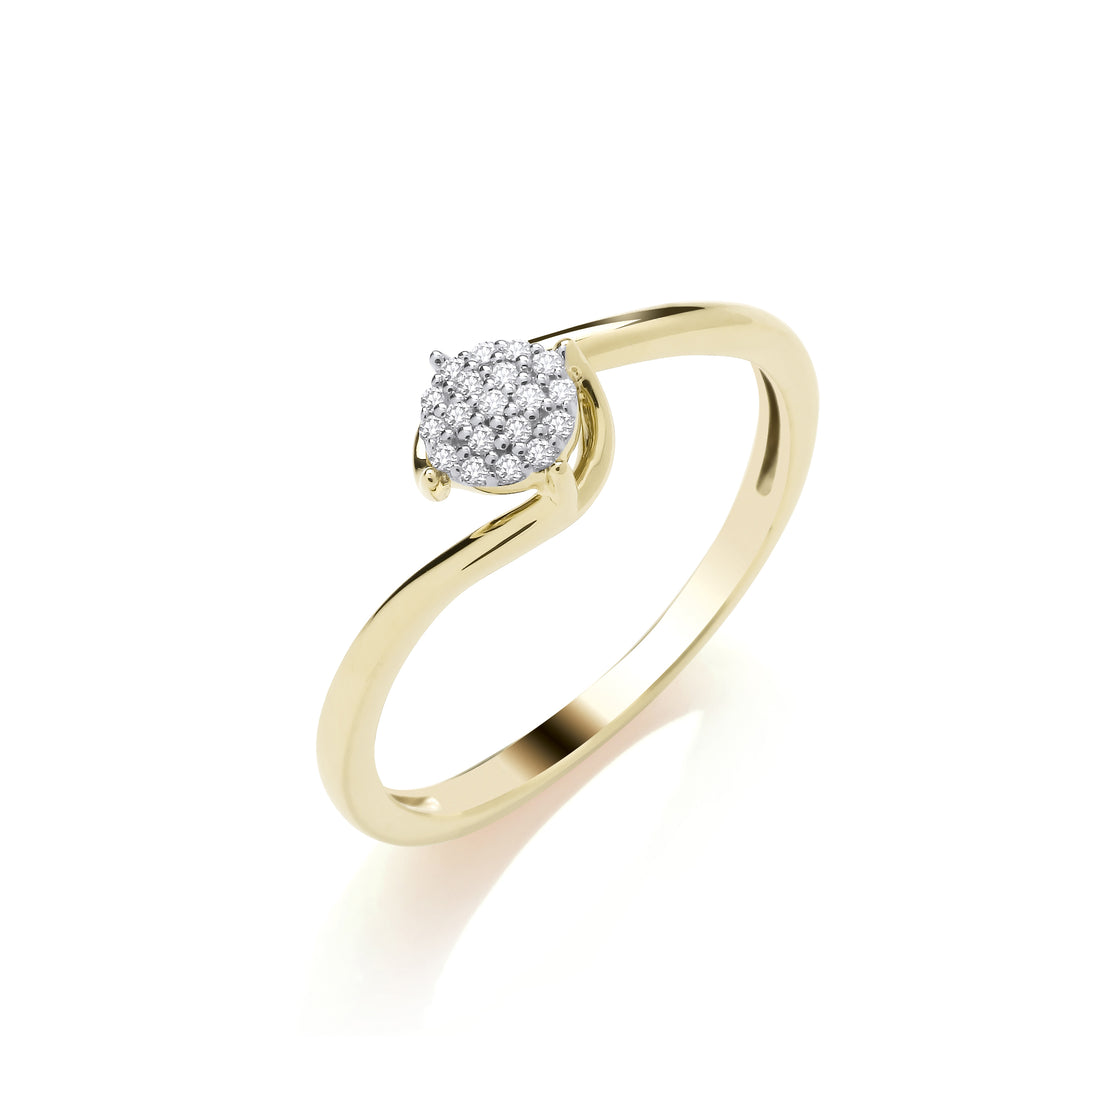 9CT Gold Round Cluster Diamond Ring with Twisted Shank - Robert Anthony Jewellers, Edinburgh